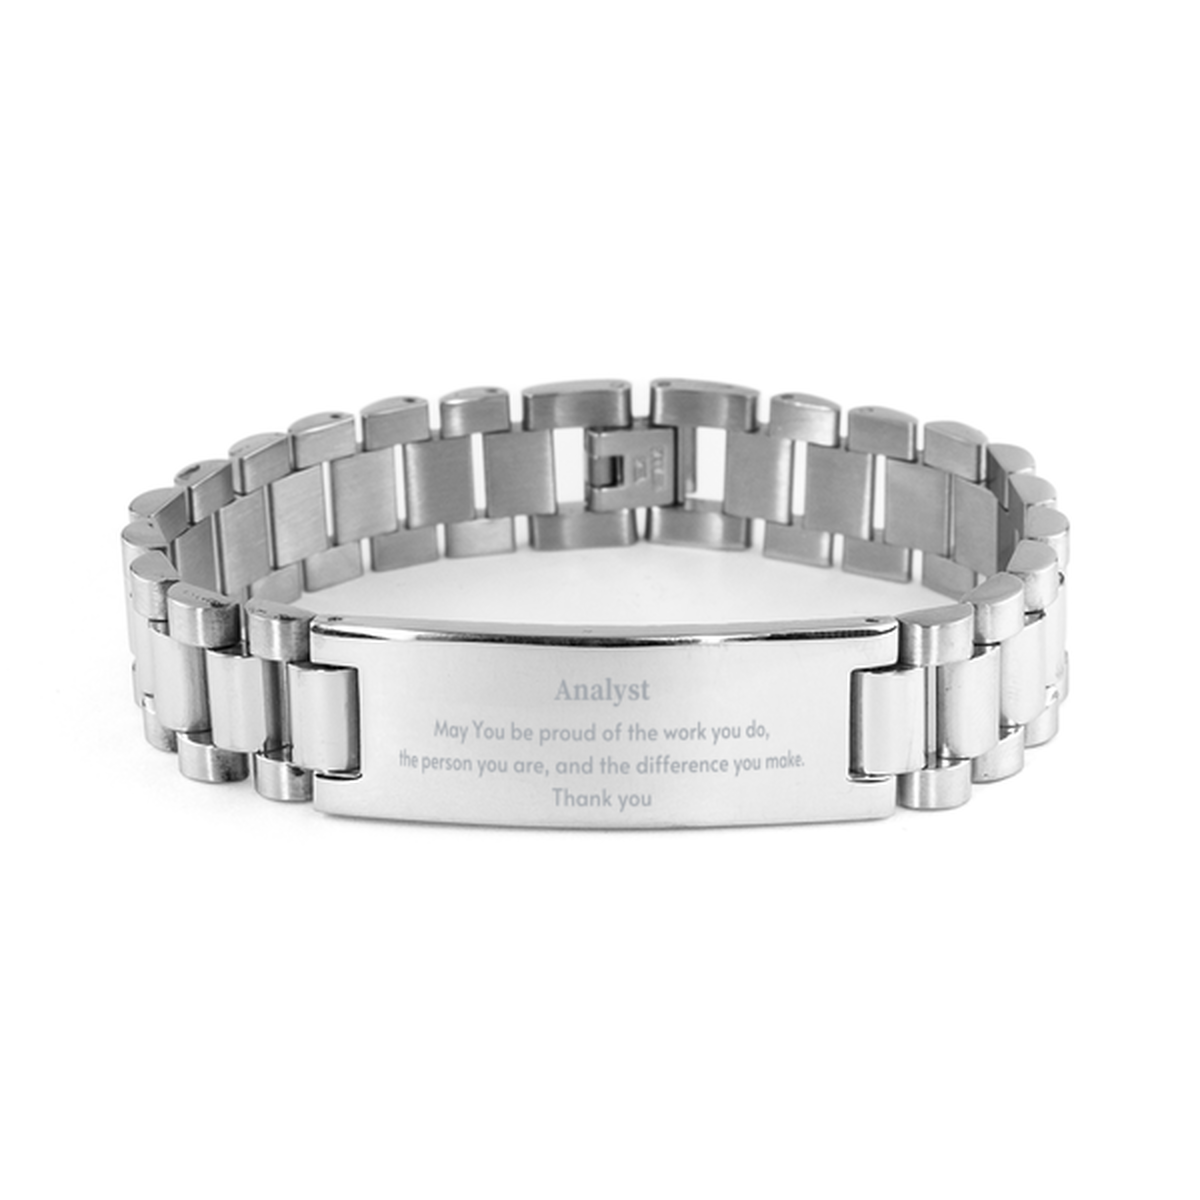 Heartwarming Ladder Stainless Steel Bracelet Retirement Coworkers Gifts for Analyst, Analyst May You be proud of the work you do, the person you are Gifts for Boss Men Women Friends